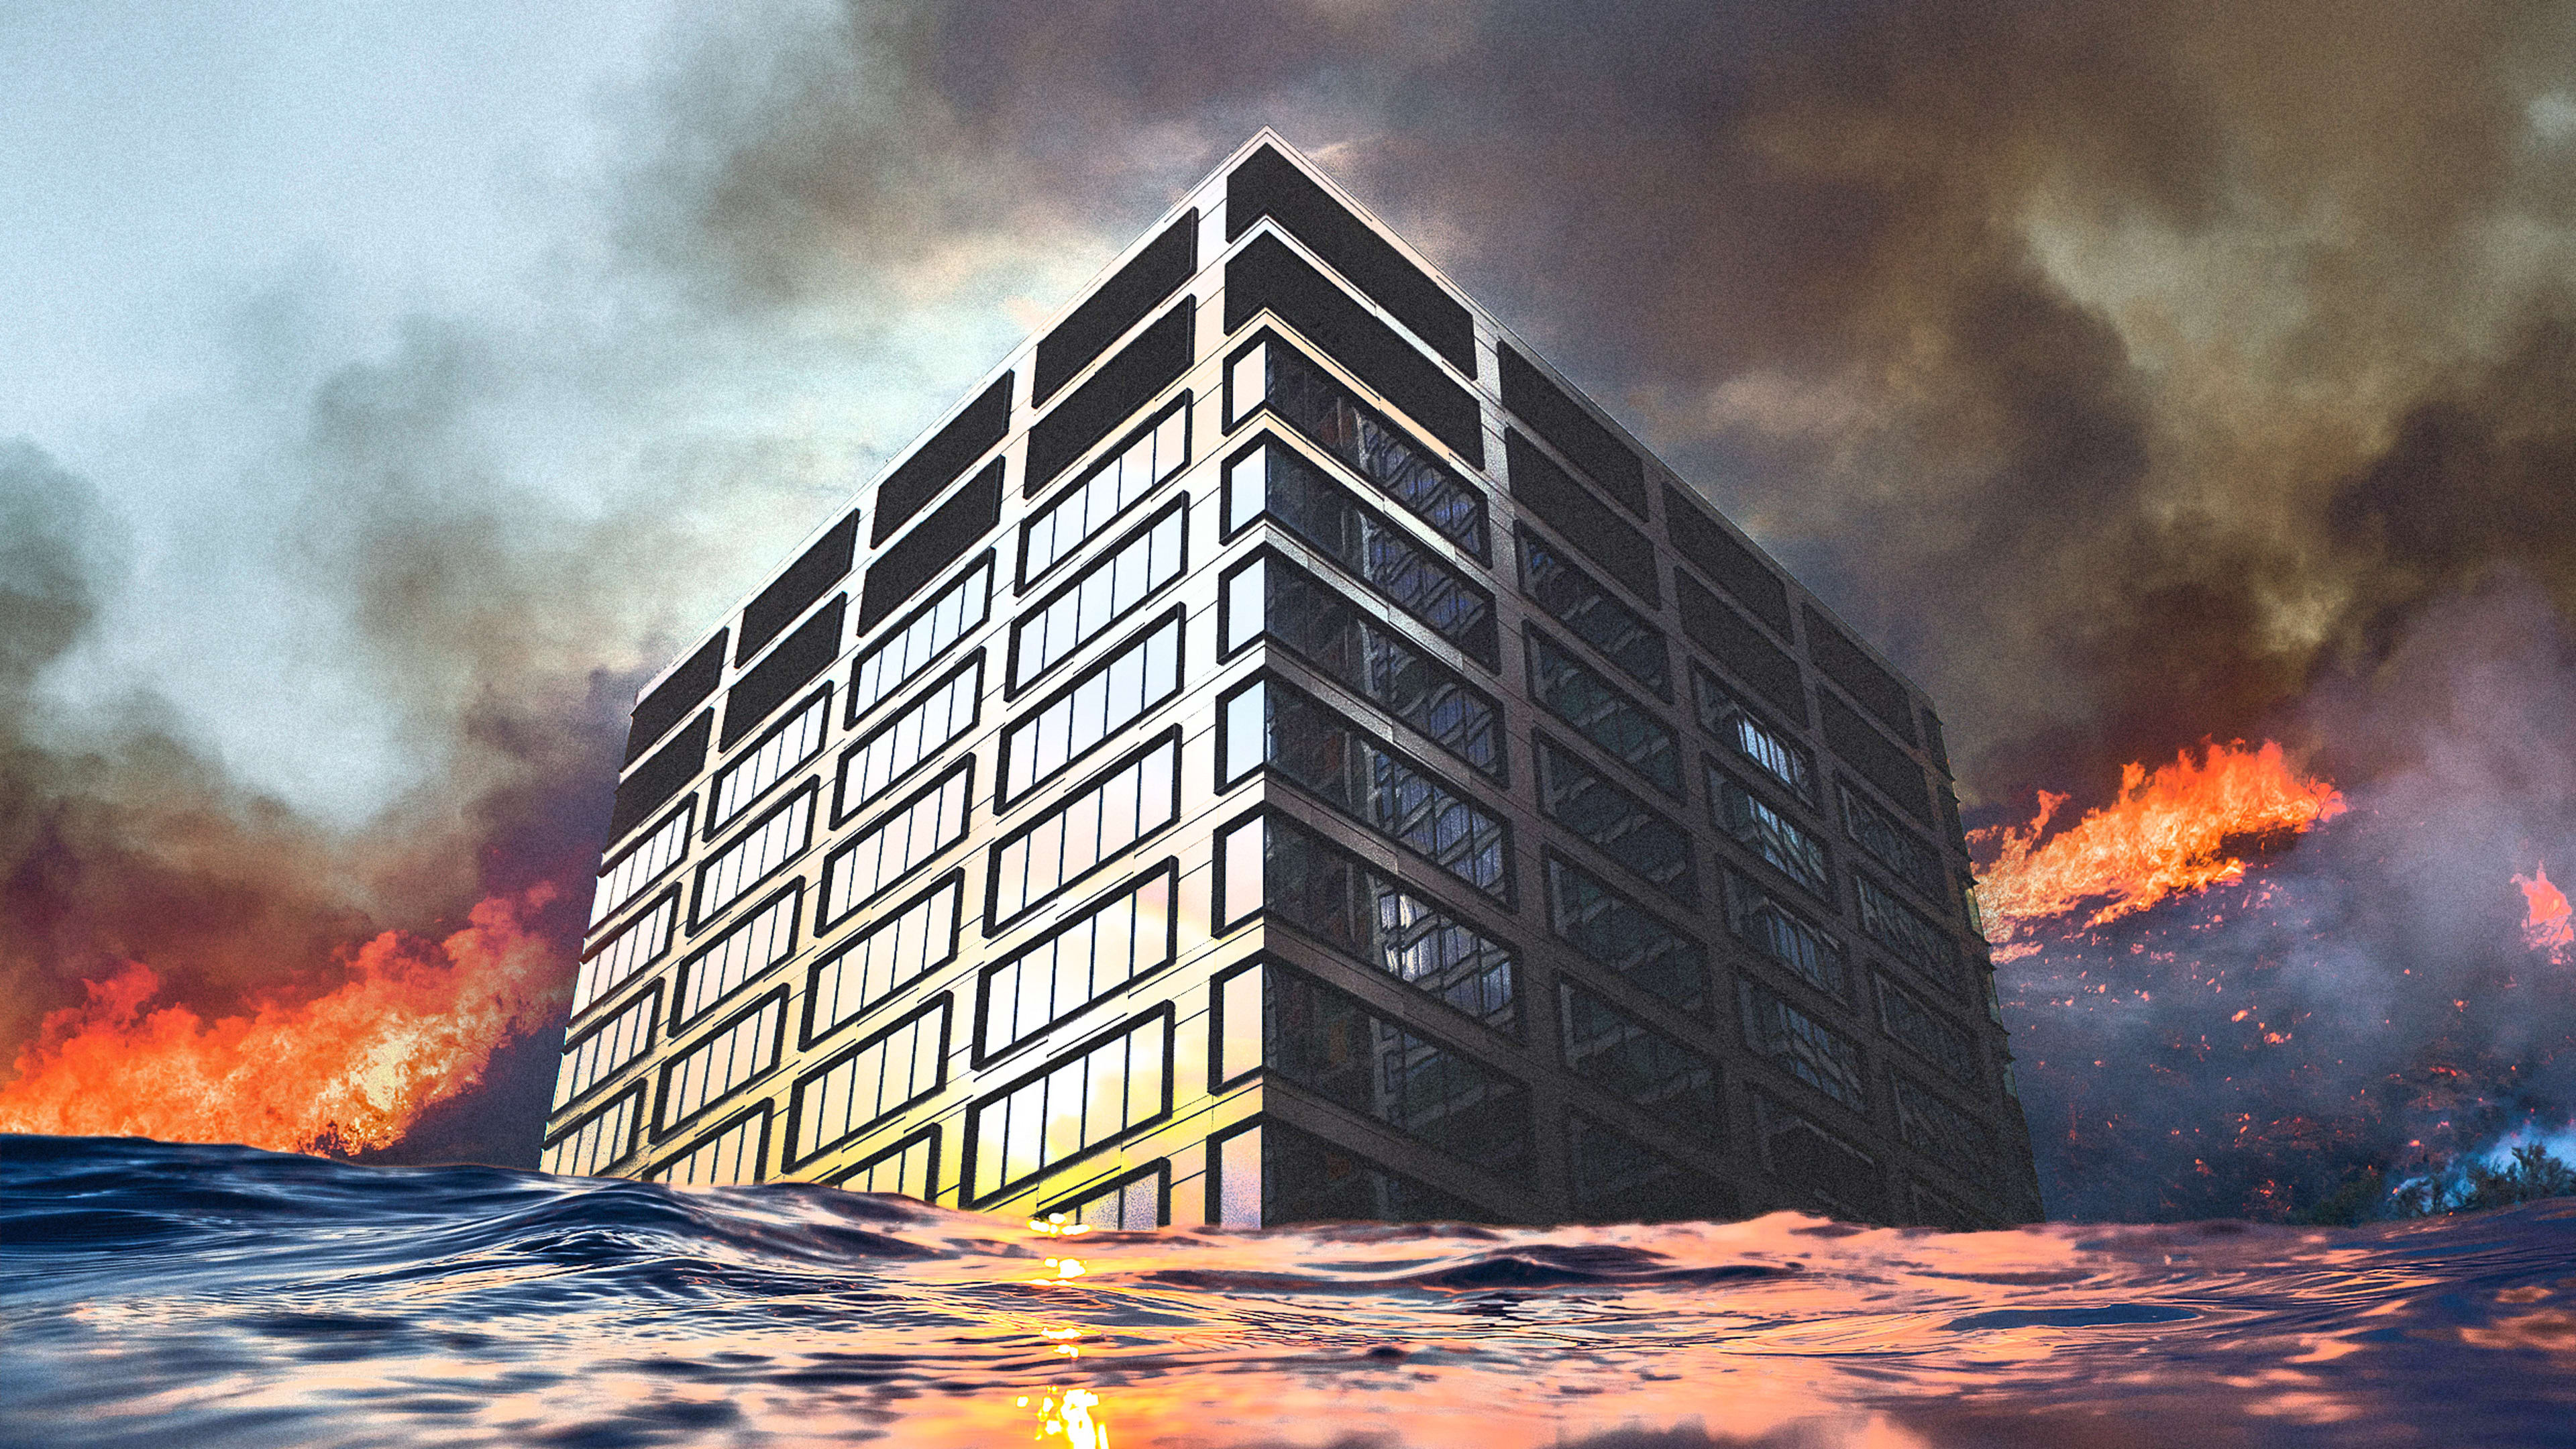 Climate change is threatening your company’s building. Insurance won’t be enough to protect it